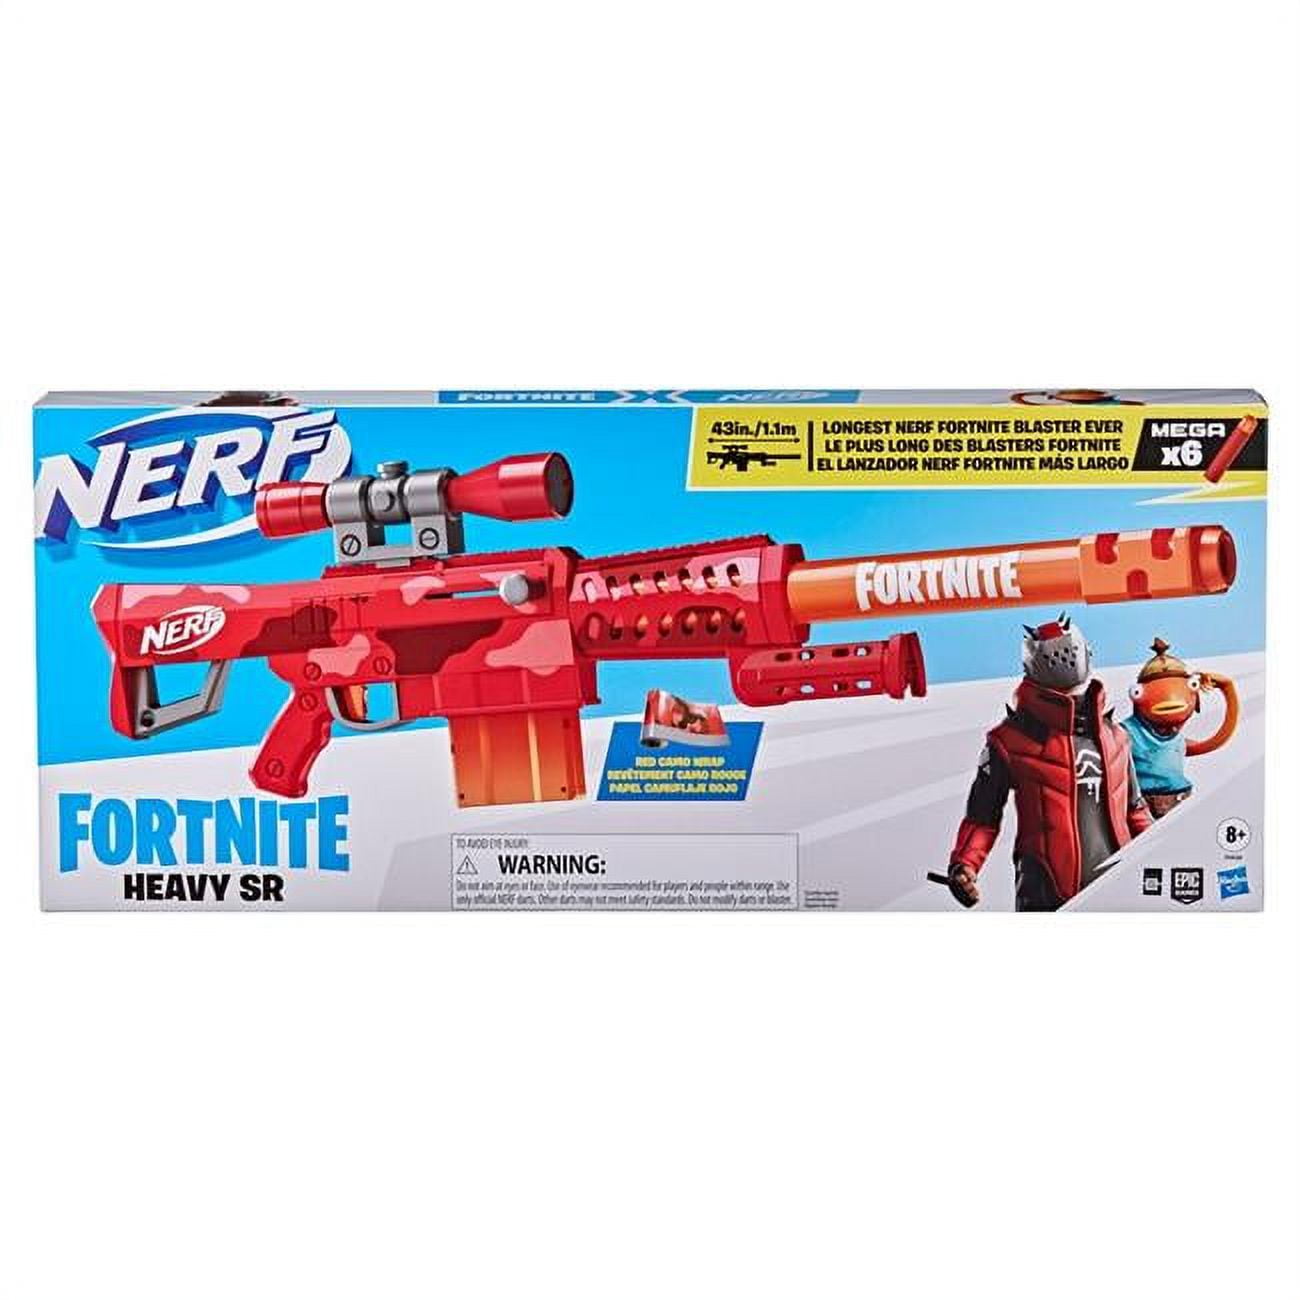 Picture of Hasbro HSBF0928 Nerf Fortnite Heavy SR Blasted Toys - Pack of 4